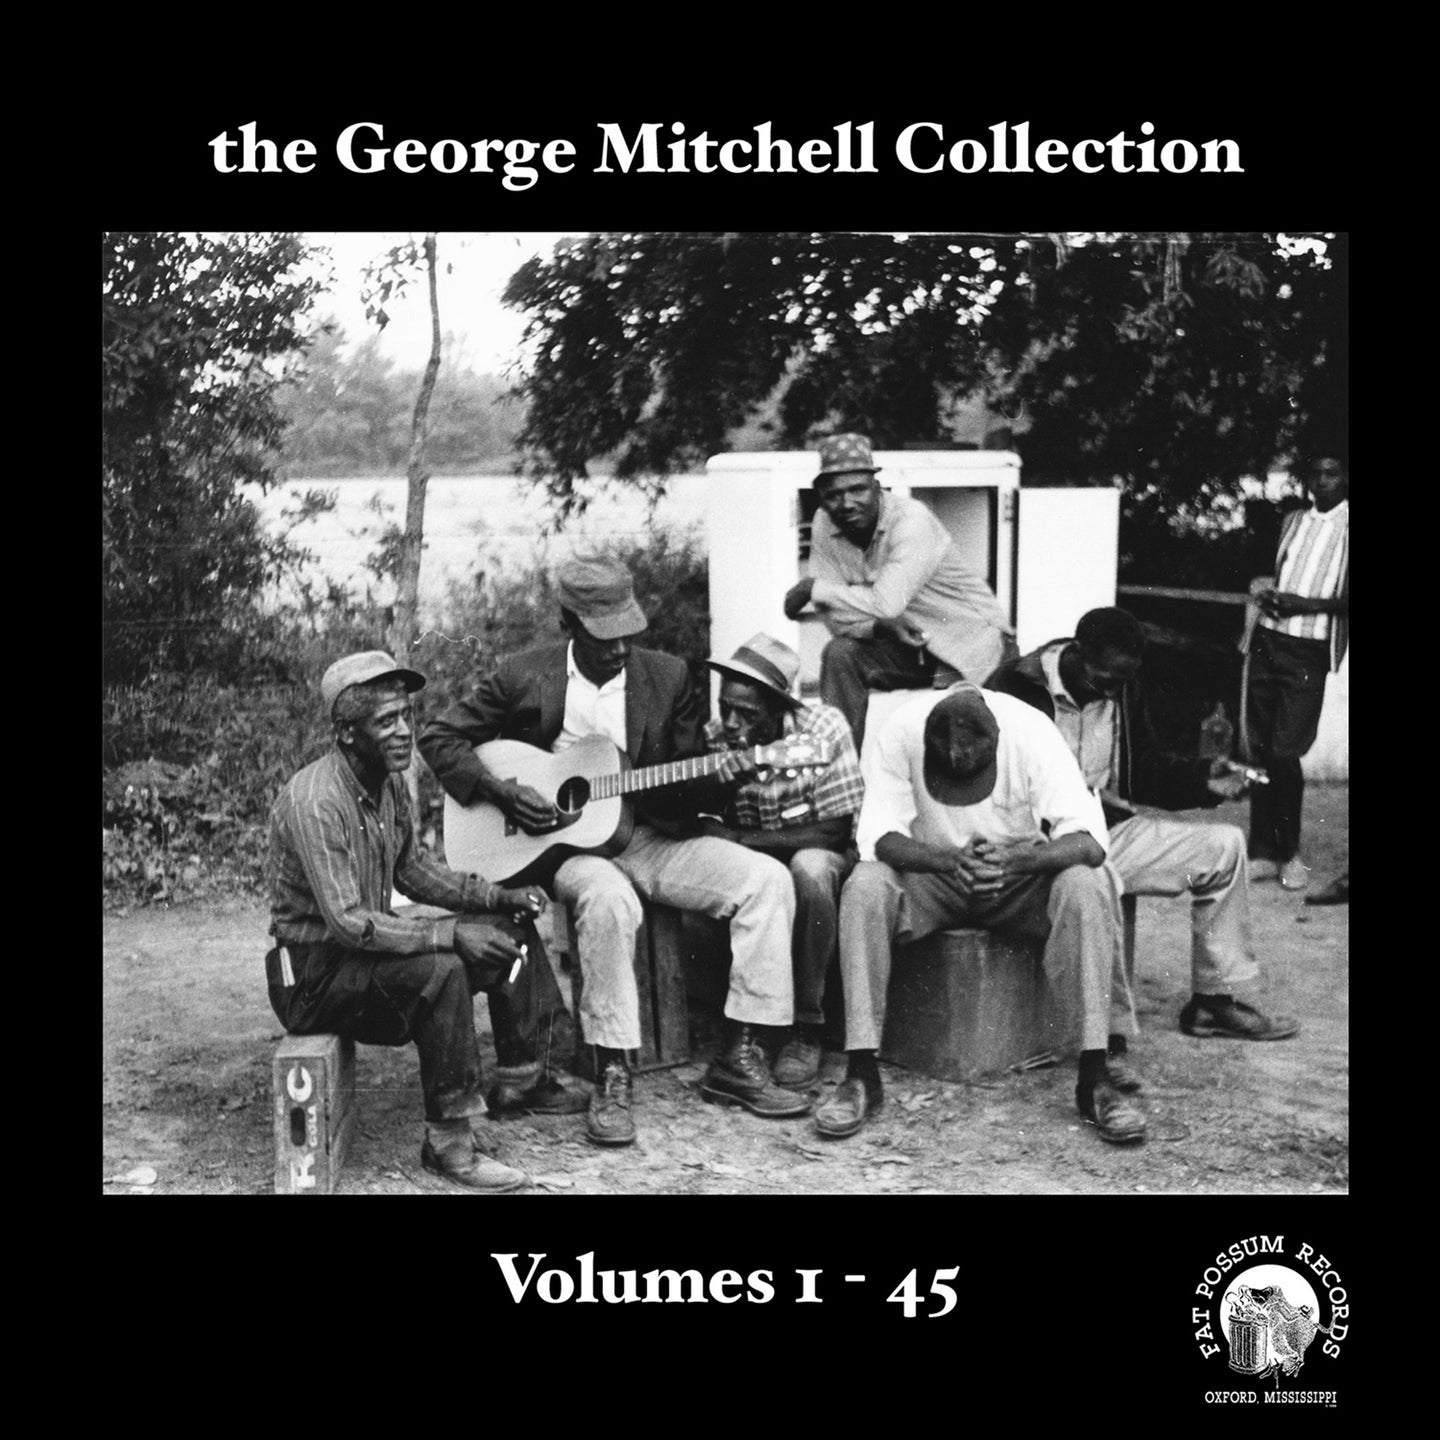 The George Mitchell Collection Box Set